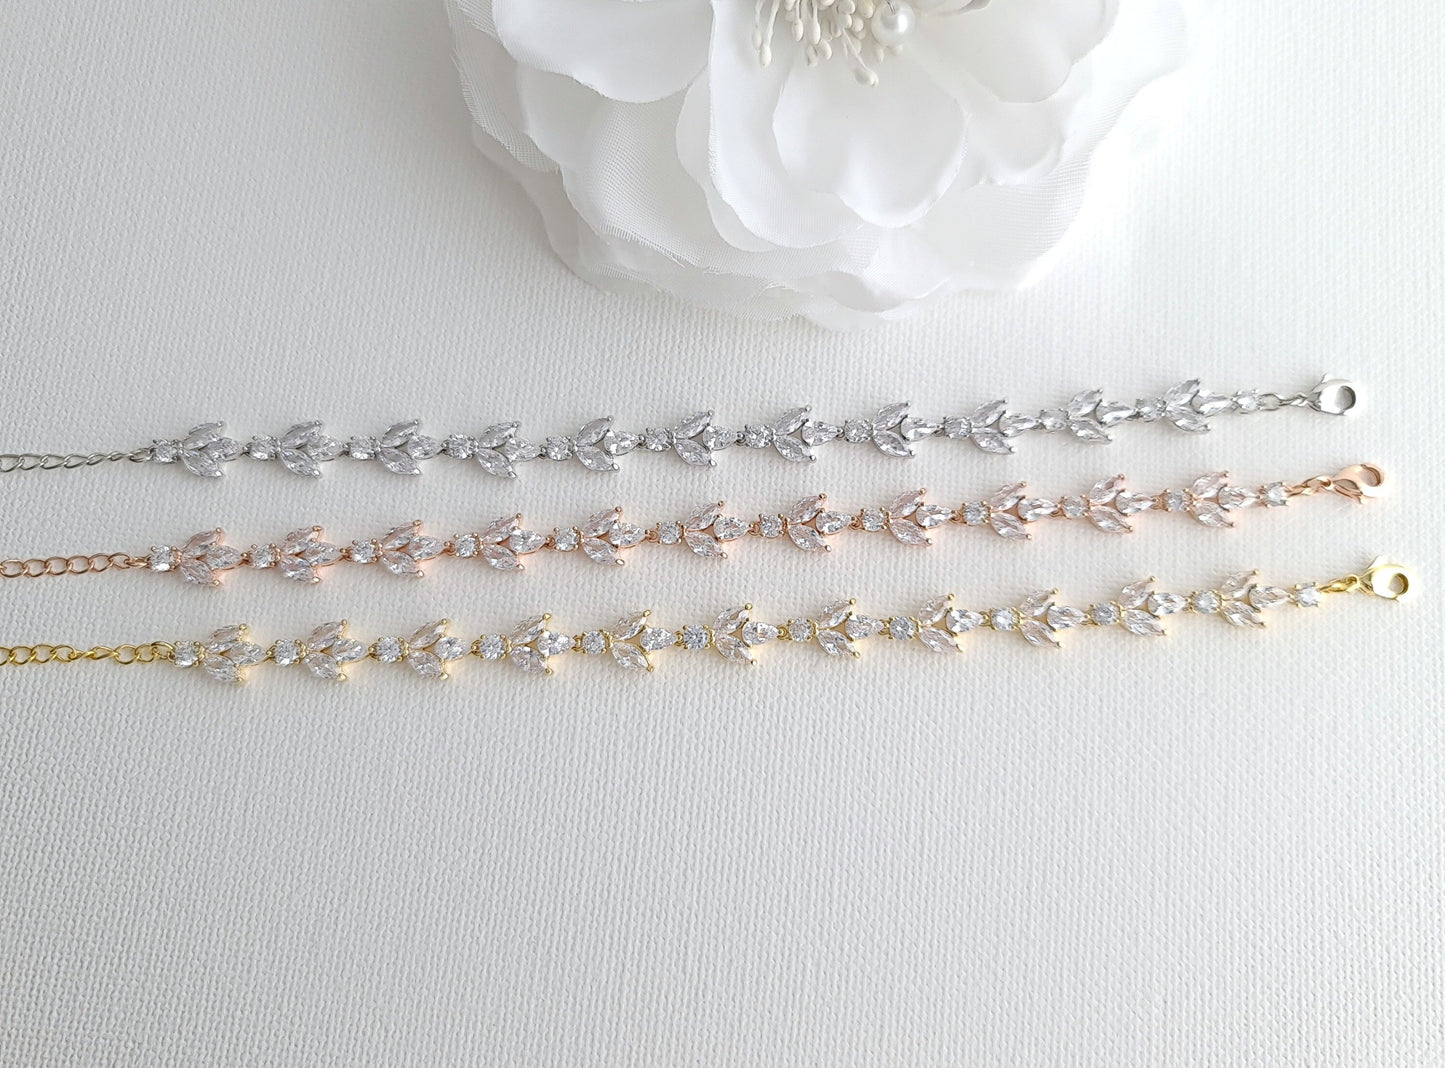 Bracelet for the Bride in CZ & Silver-Anya - PoetryDesigns